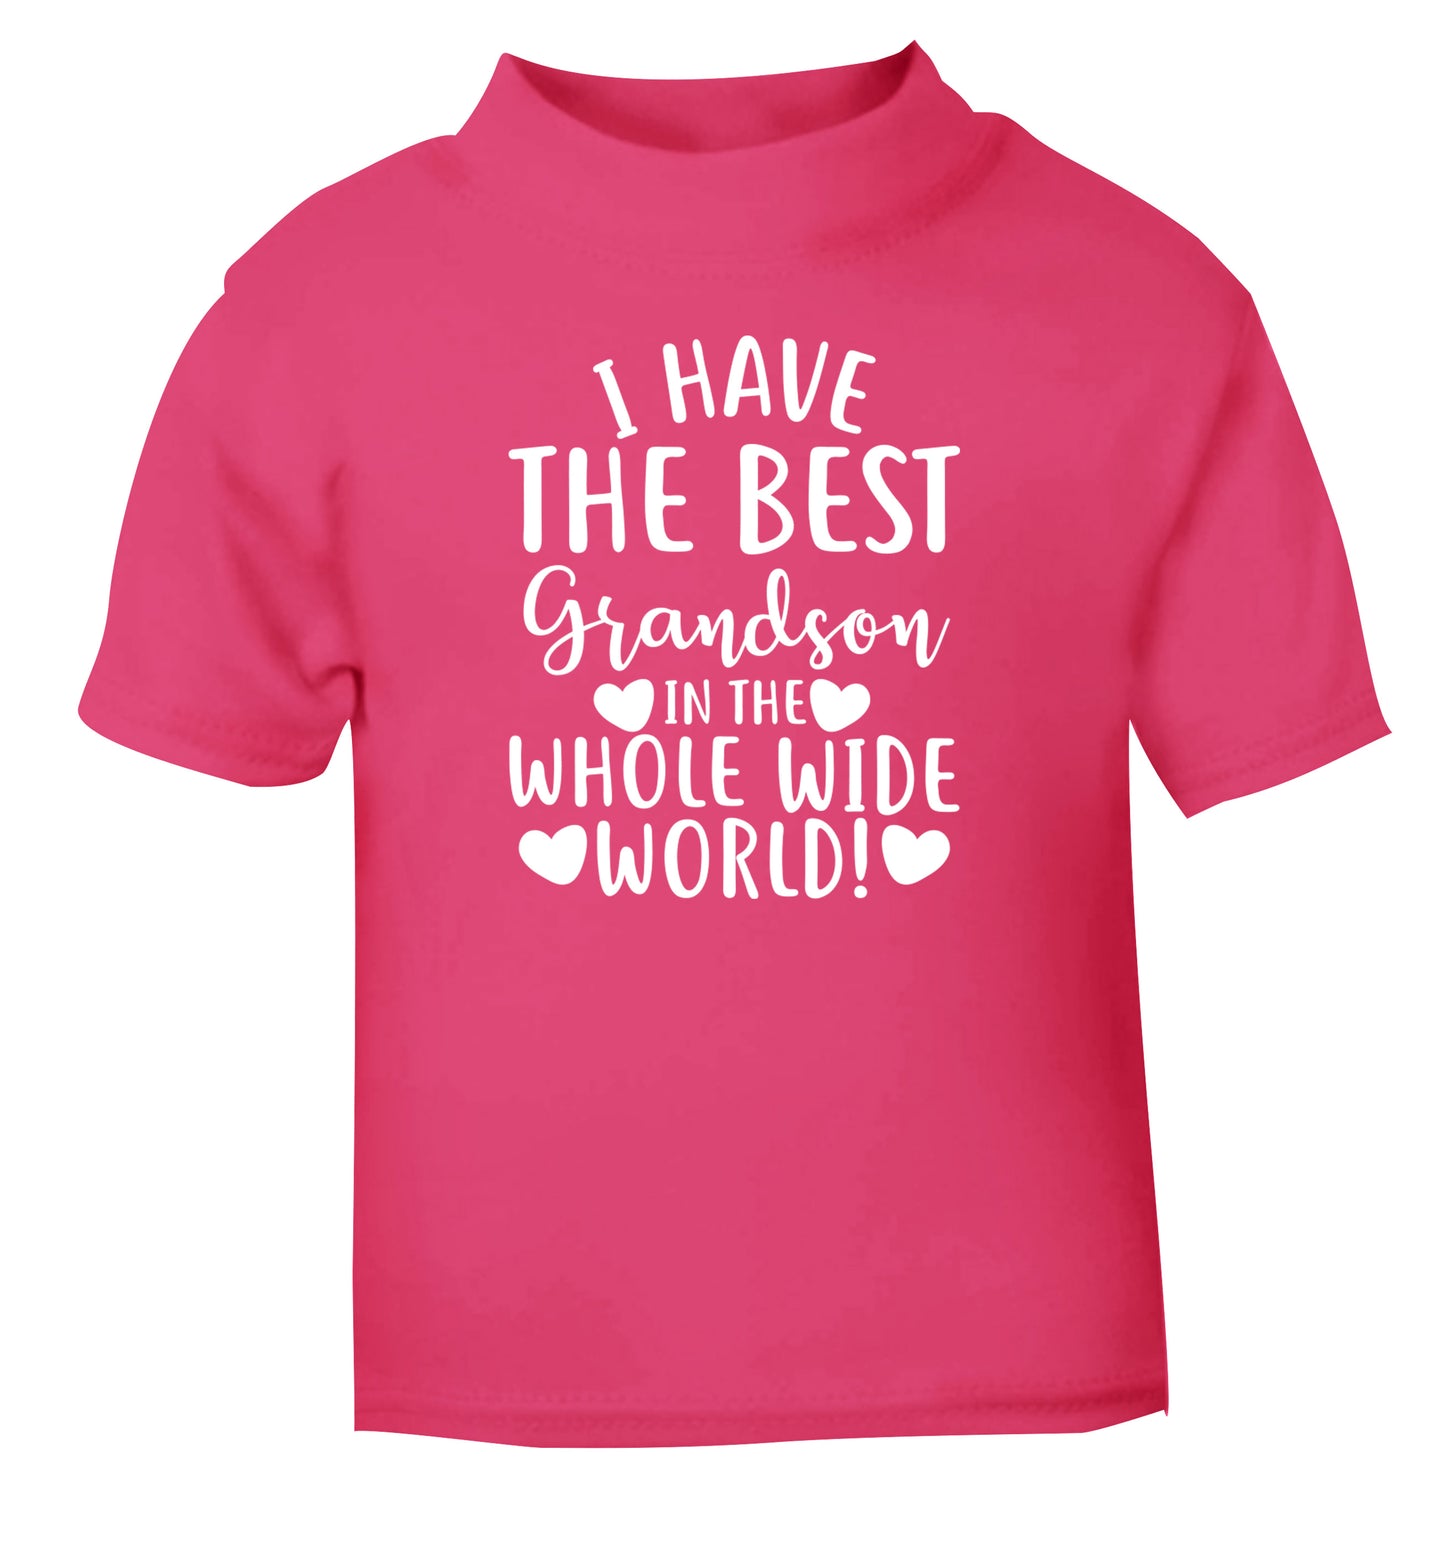 I have the best grandson in the whole wide world! pink Baby Toddler Tshirt 2 Years